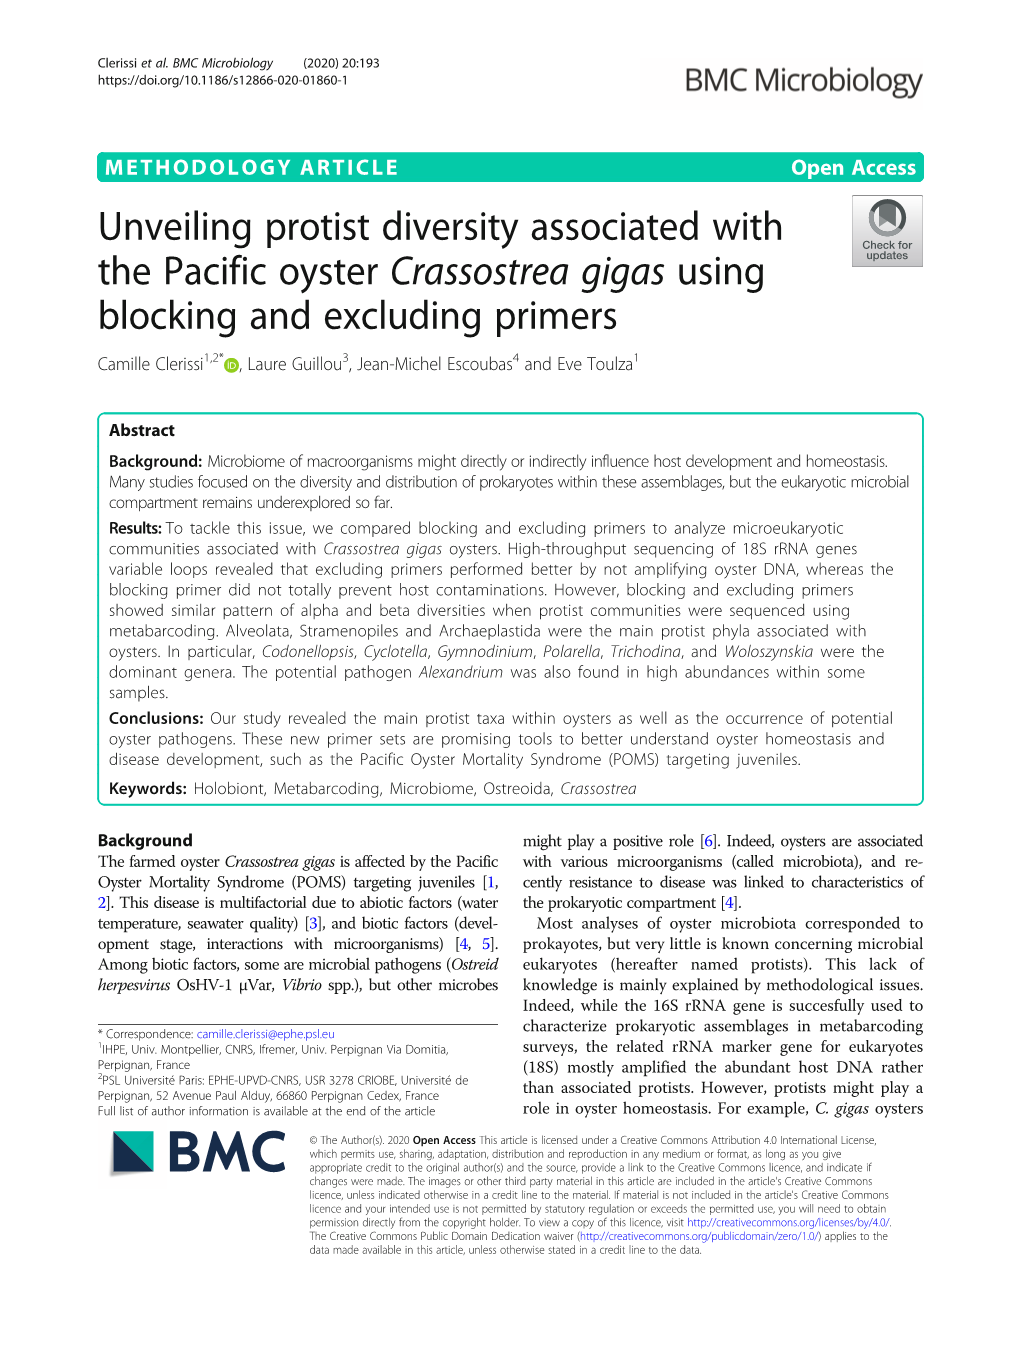 Unveiling Protist Diversity Associated with the Pacific Oyster Crassostrea